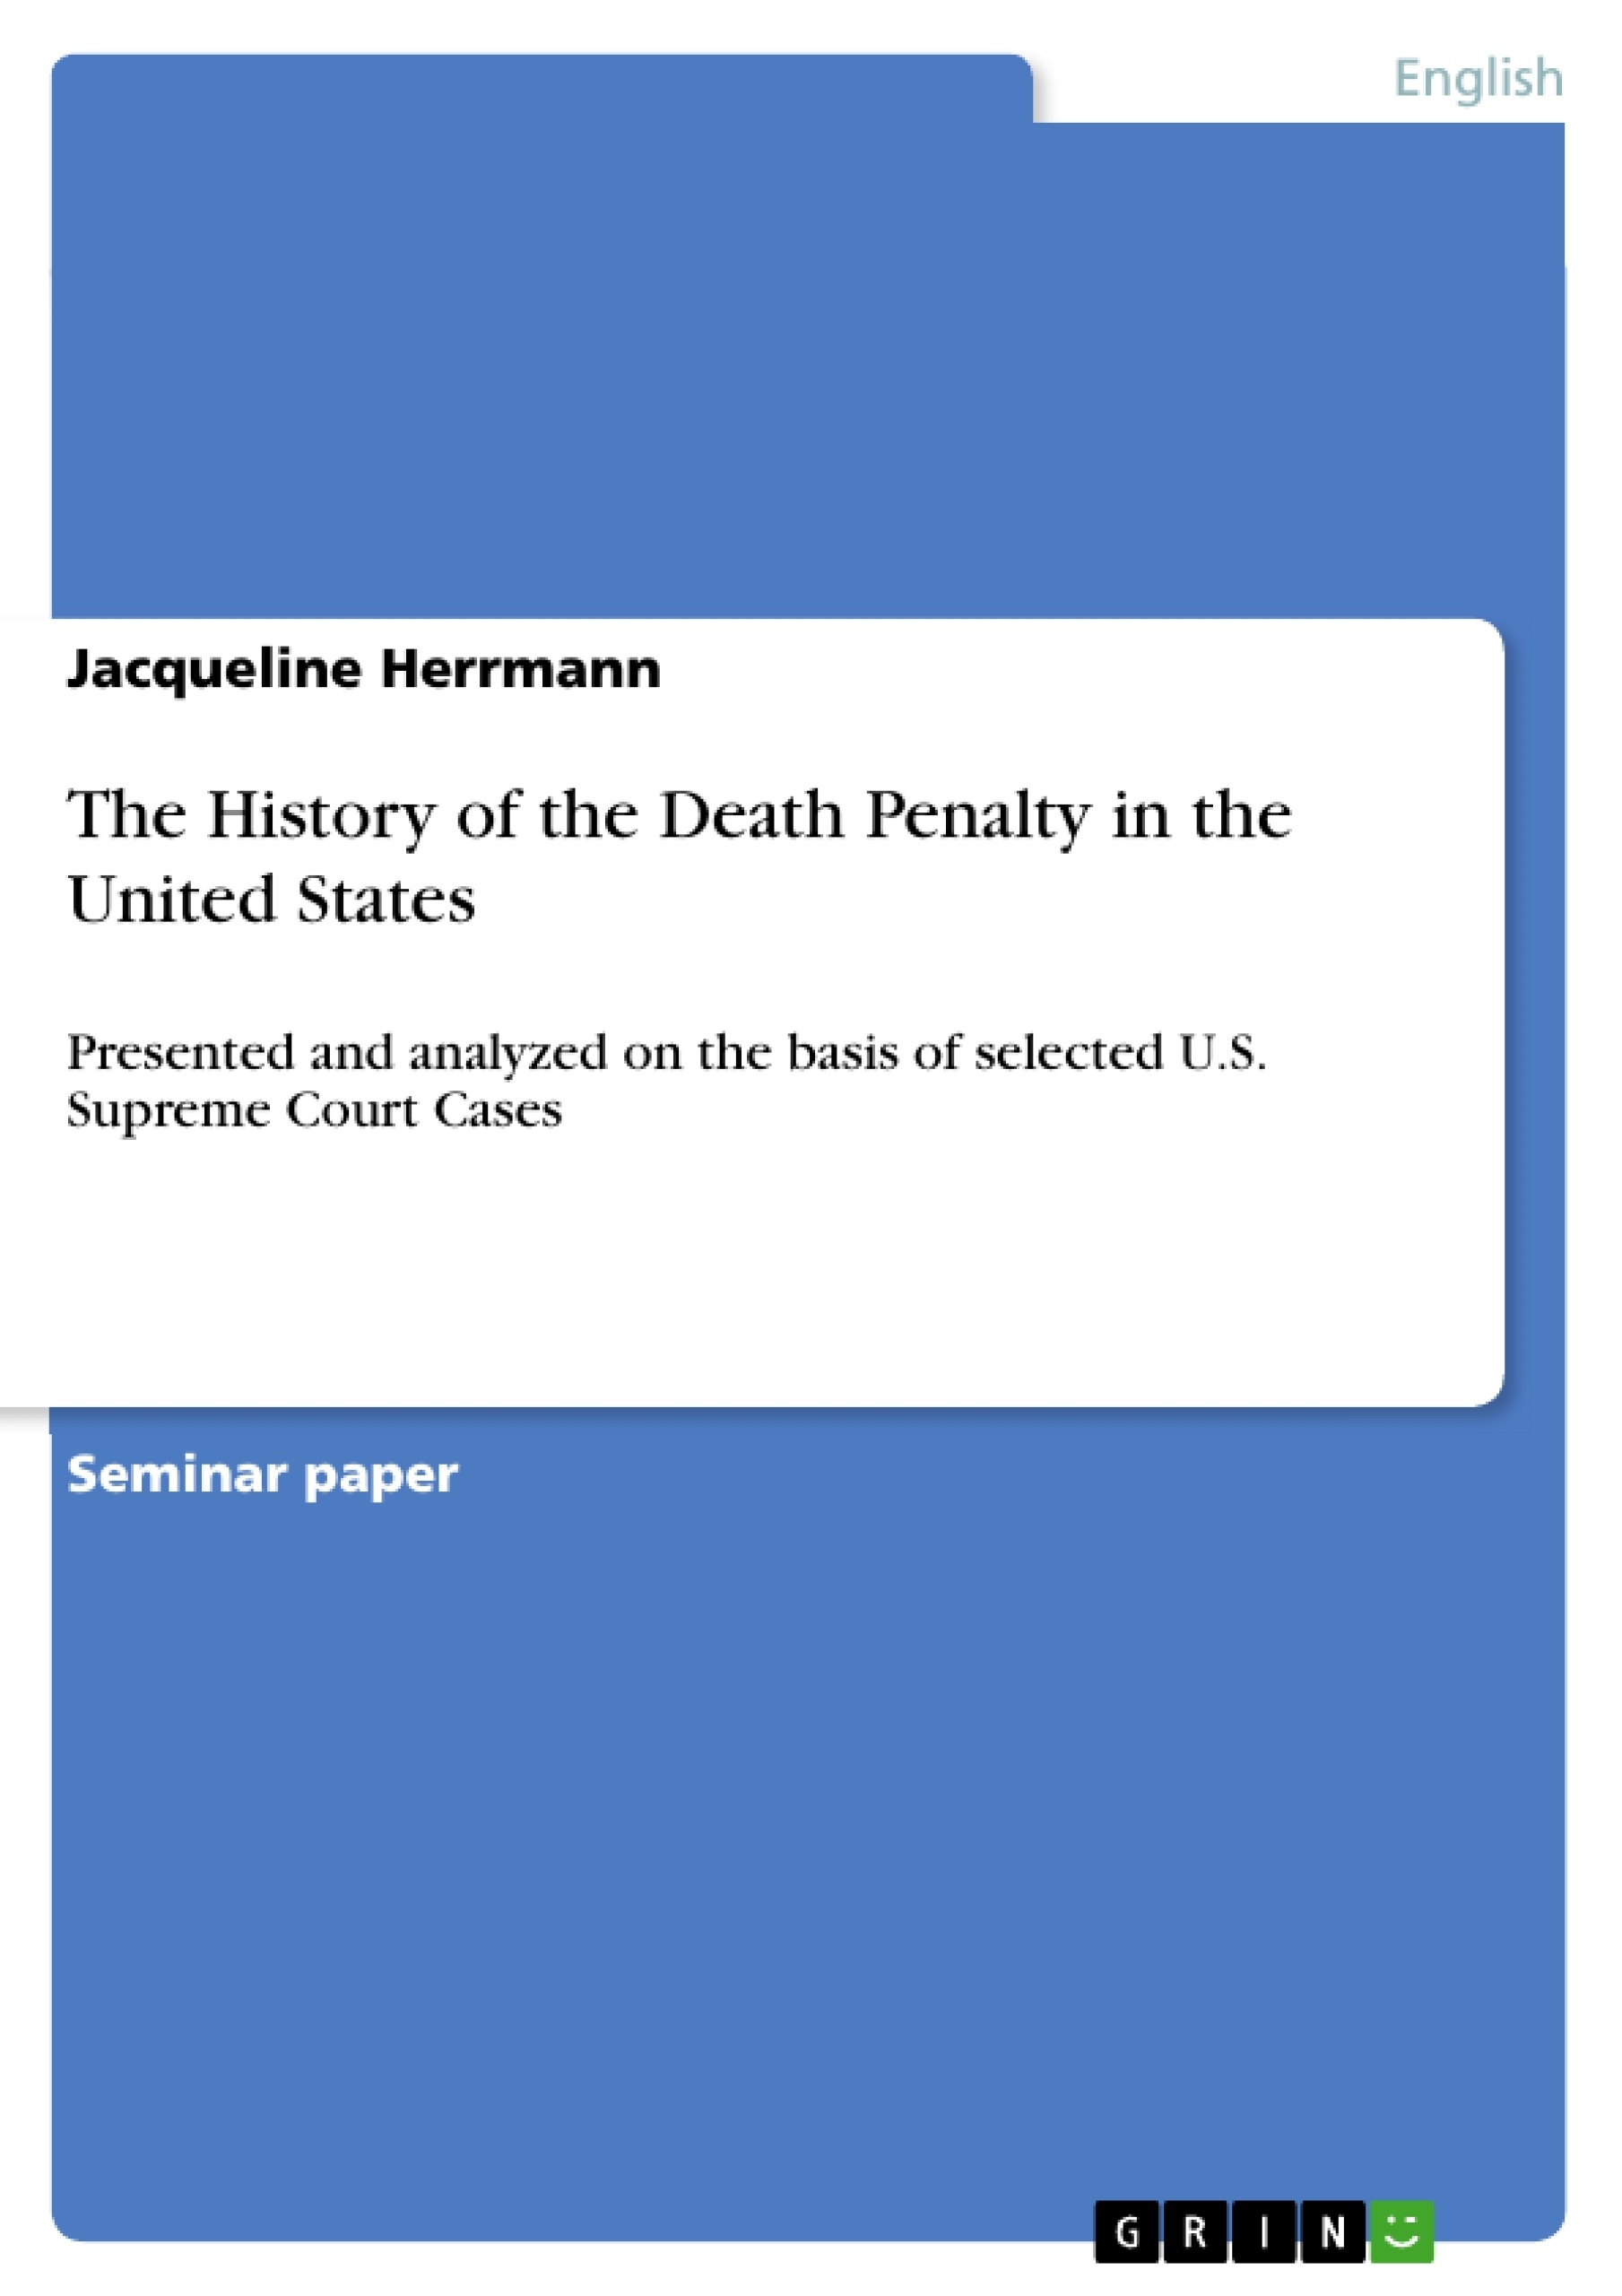 Titre: The History of the Death Penalty in the United States